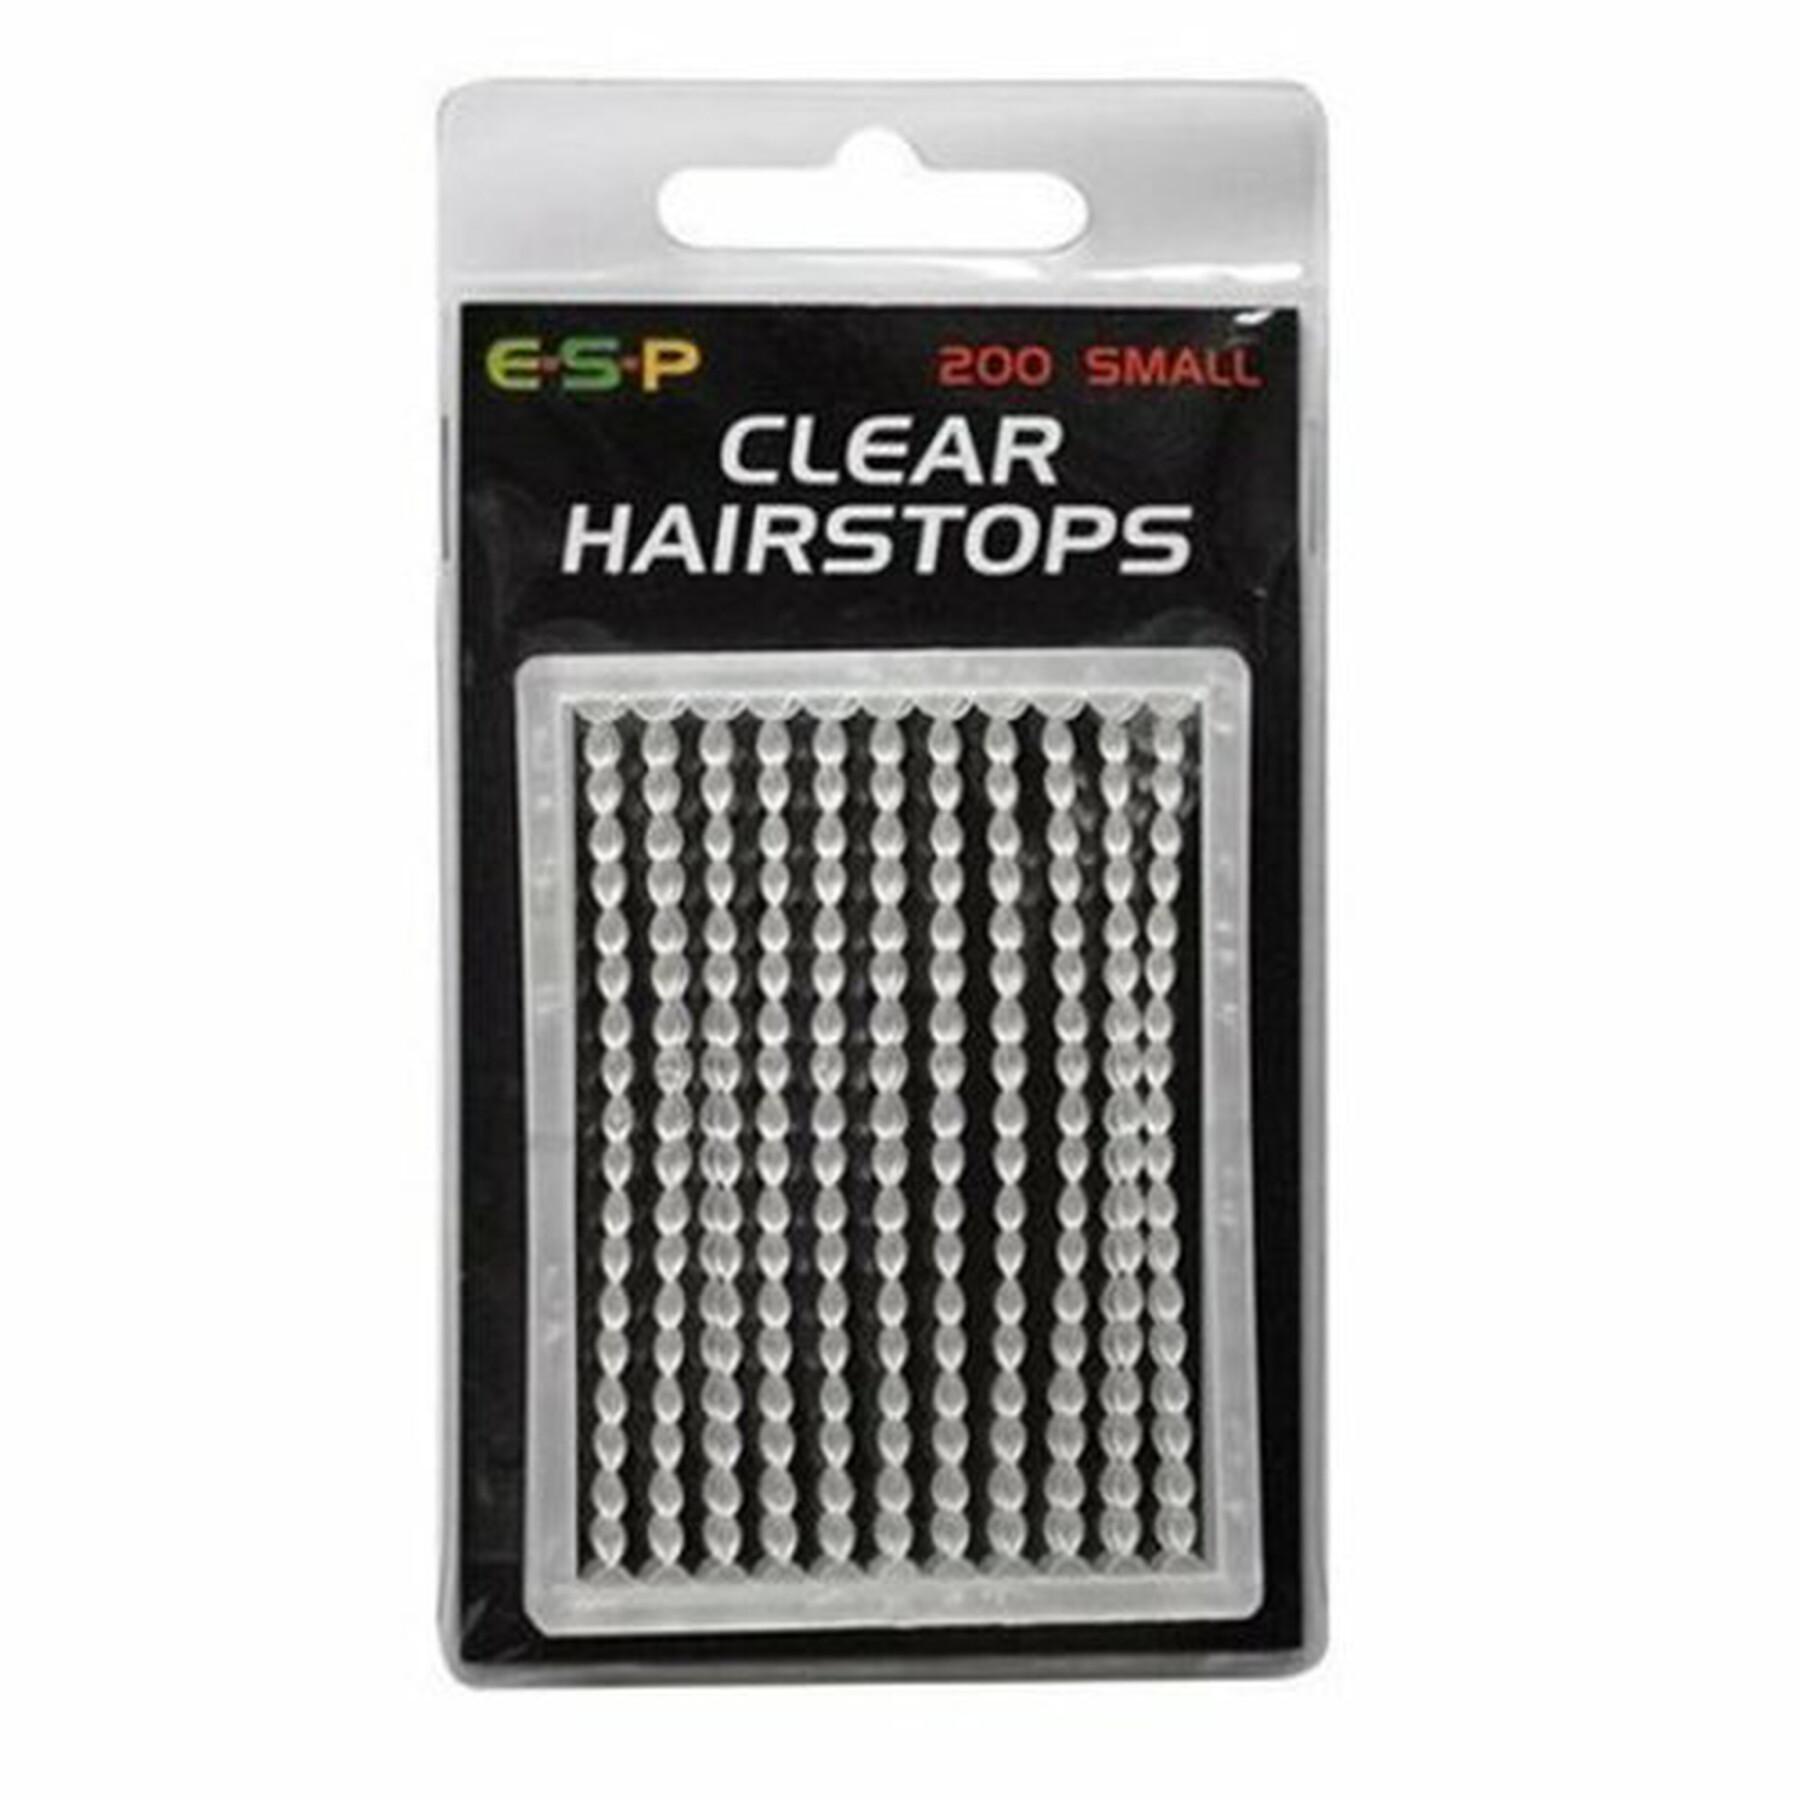 Hairstops ESP Clear S